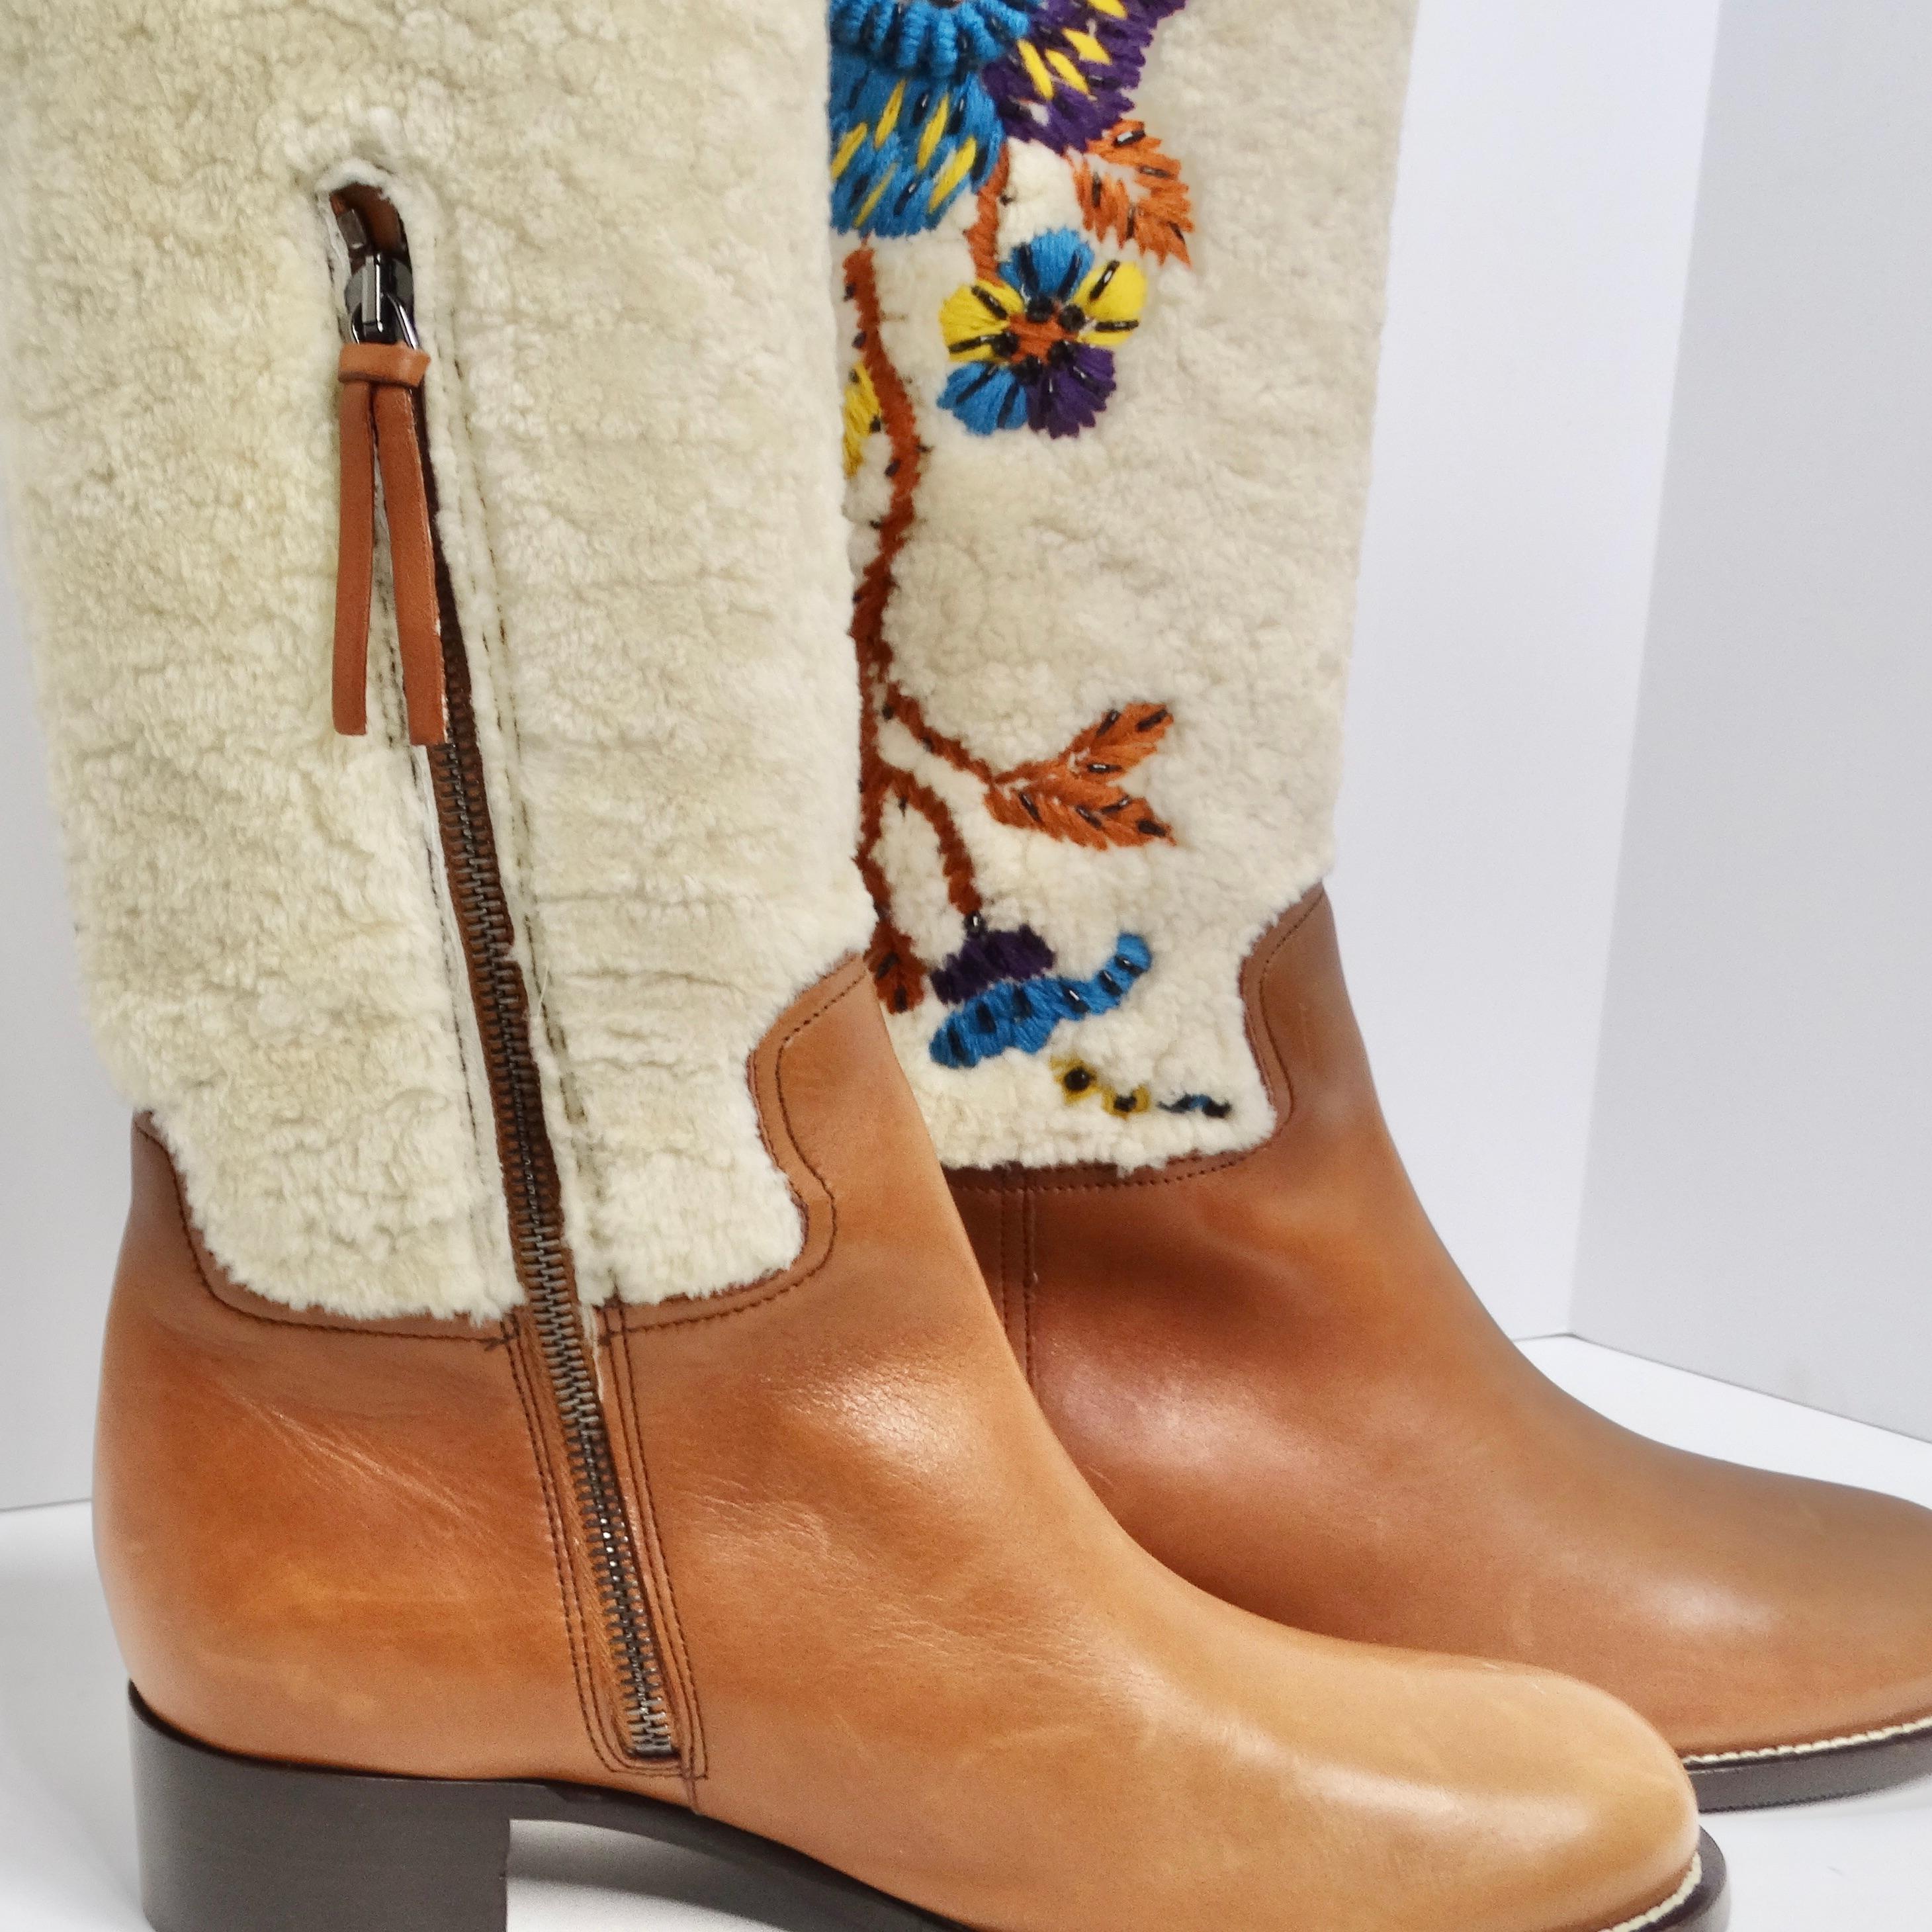  Miu Miu Floral Brown Leather Floral Shearling Riding Boots For Sale 3